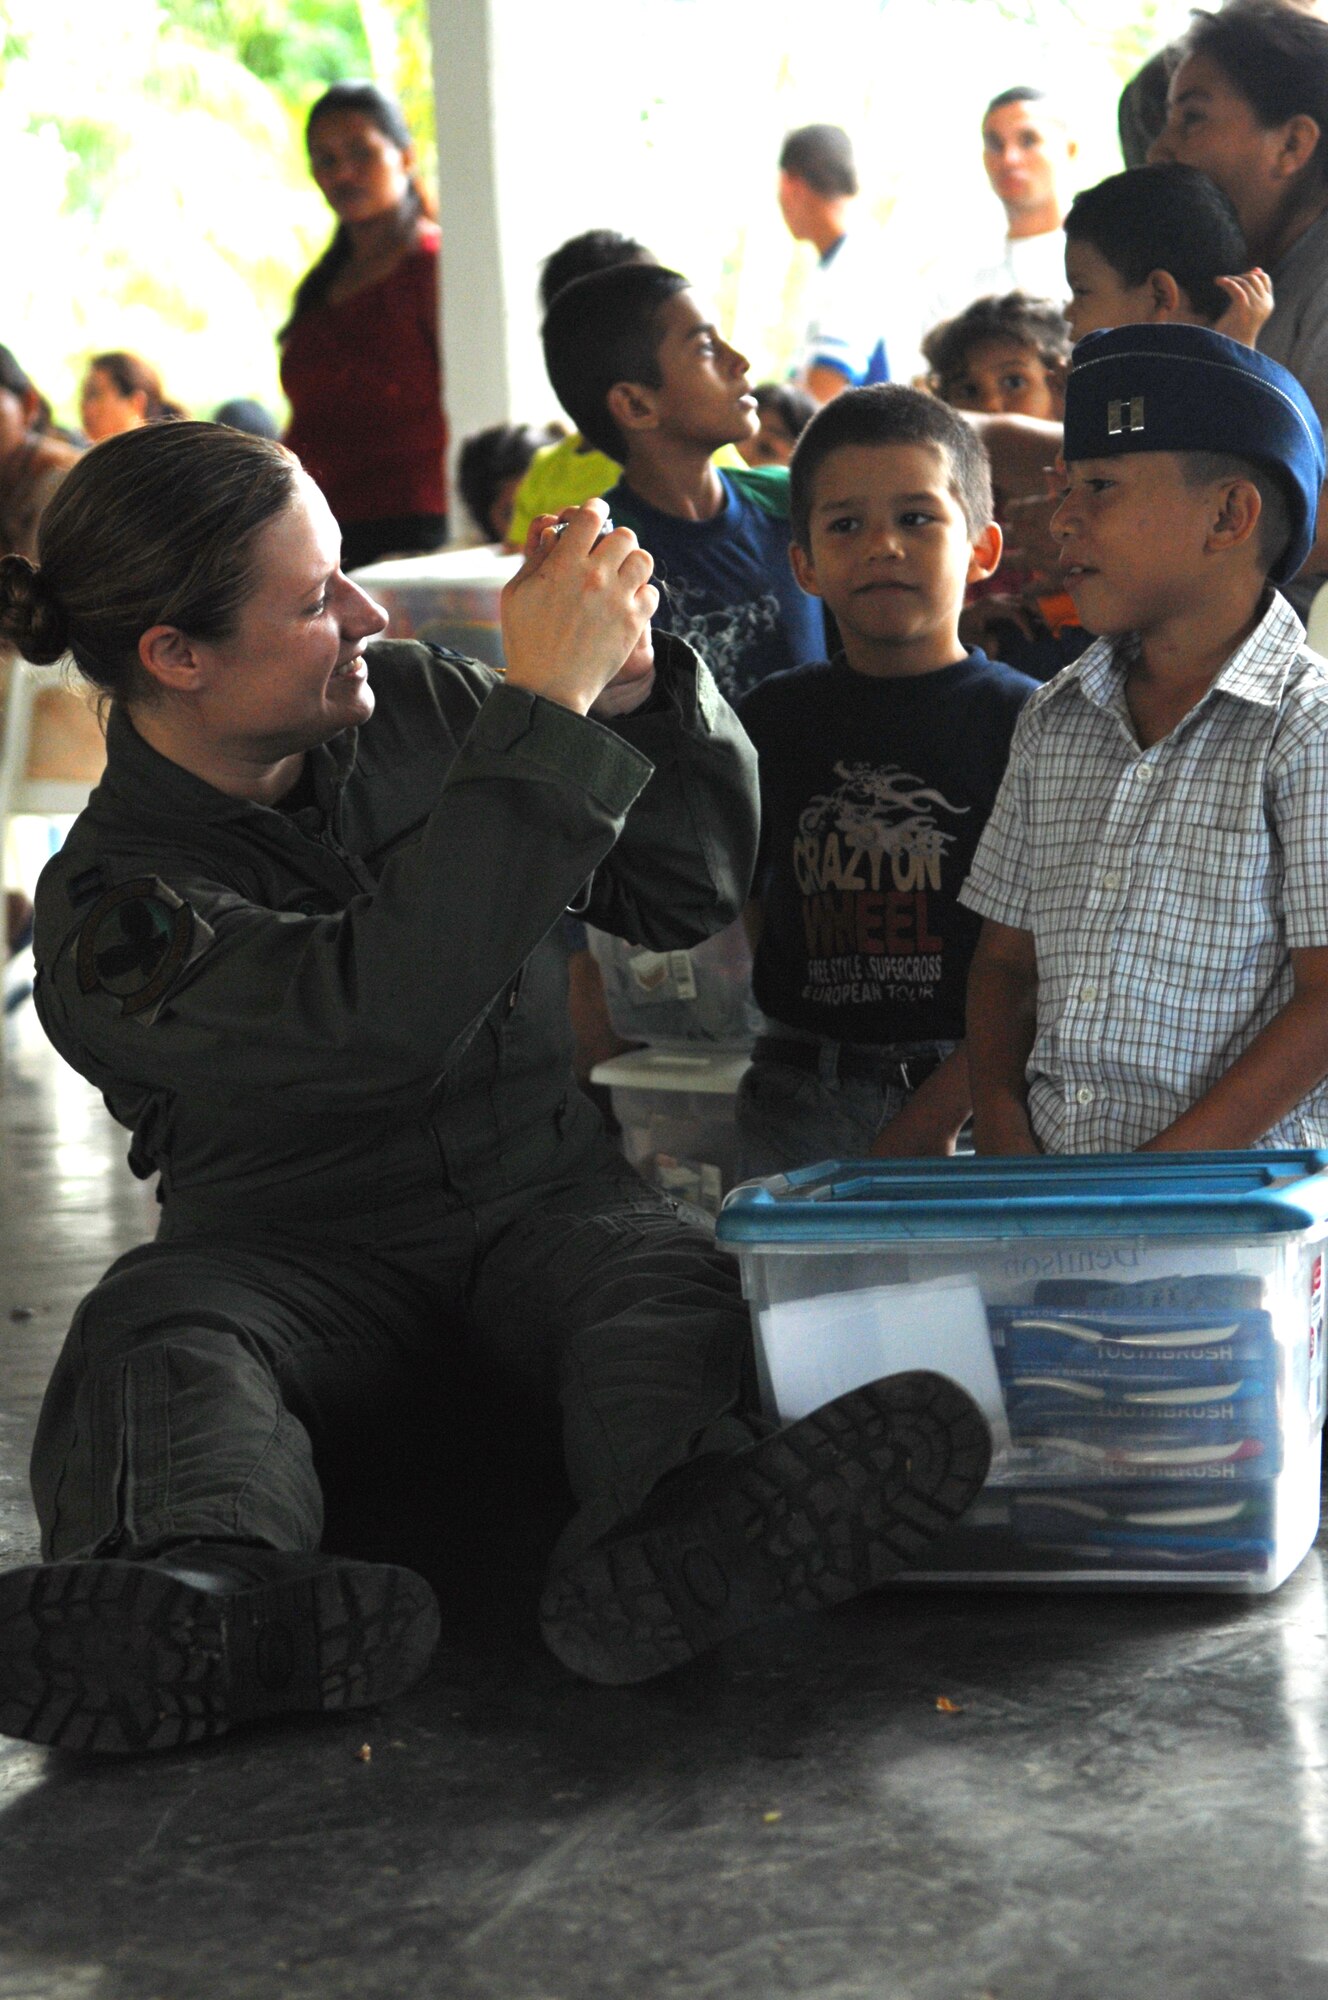 Capt. Heather Demis, 9th Special Operations Squadron, takes a photo of a Honduran orphan wearing her flightcap at Aldea Infantil S.O.S Orphanage in La Ceiba, Honduras during Operation Christmas Wish, Dec. 13. Captain Demis was part of a 16 person team that helped deliver more than 875 Christmas packages to five different Honduran orphanages. (U.S. Air Force photo/Senior Airman Ali Flisek)